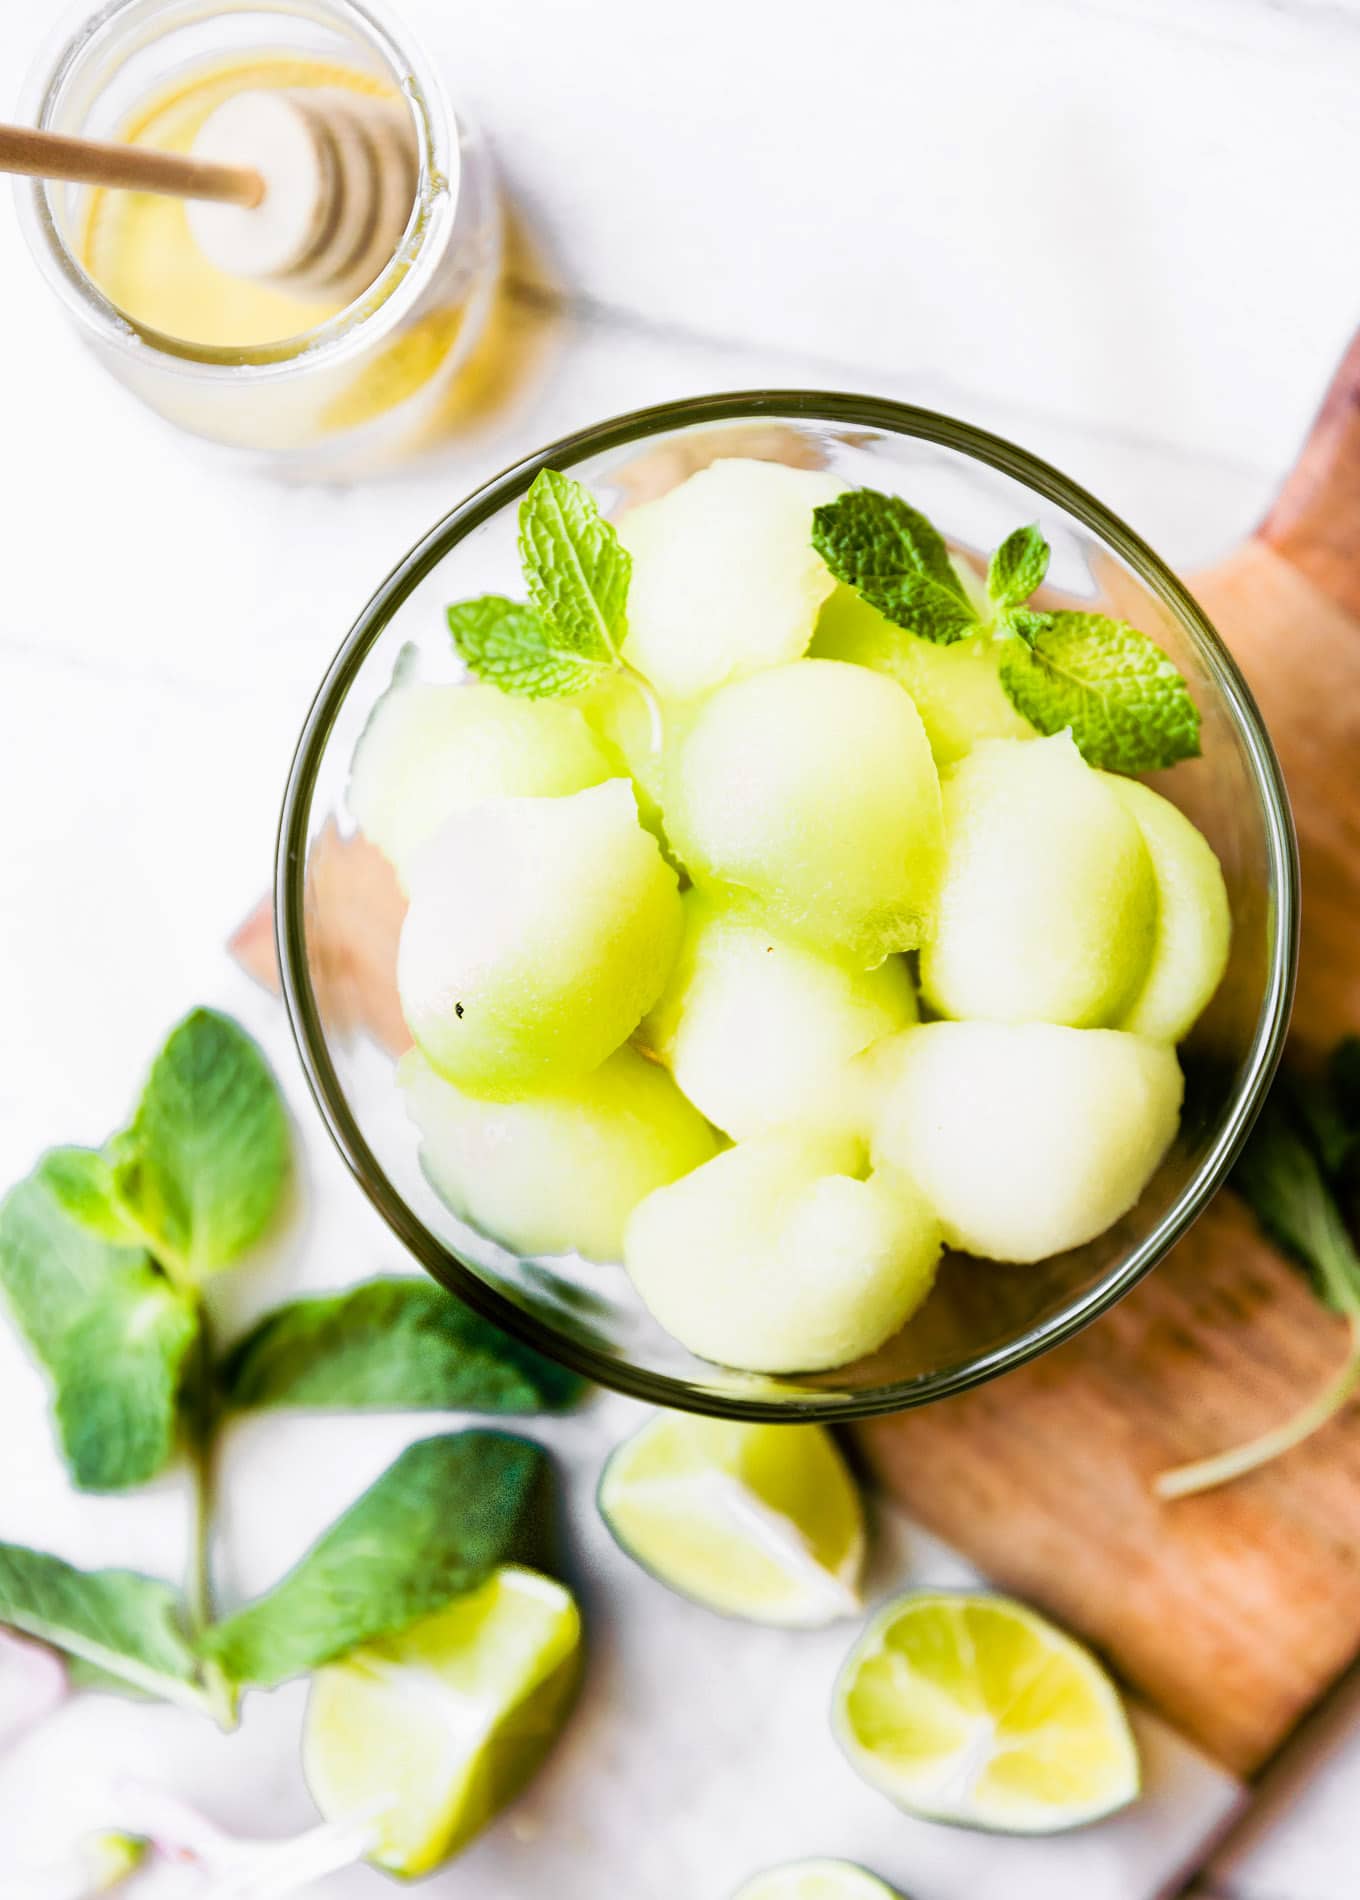 Overhead view melon balls in white glass on wooden cutting board, fresh mint nearby.